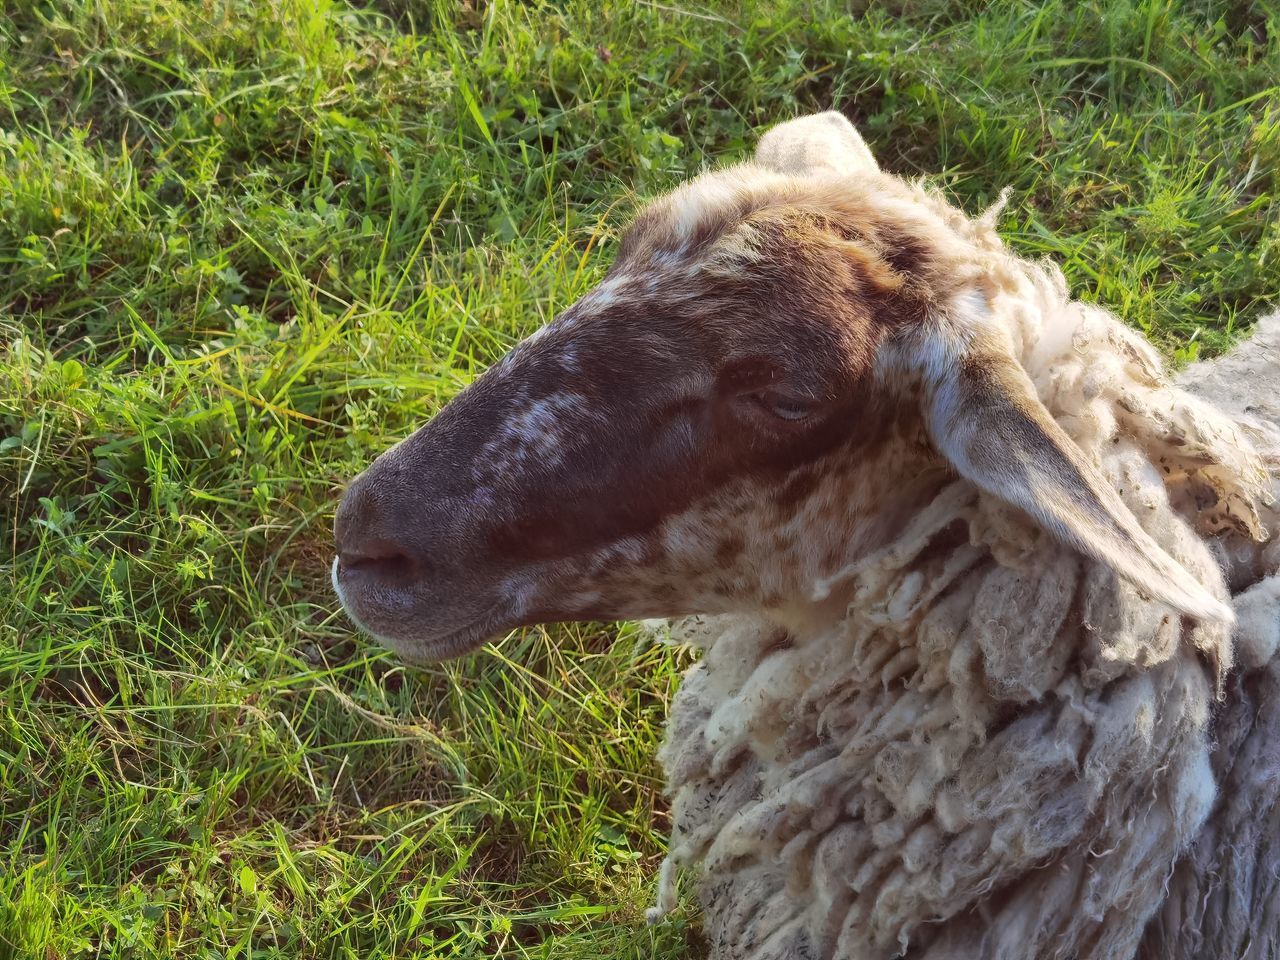 CLOSE-UP OF SHEEP ON FIELD